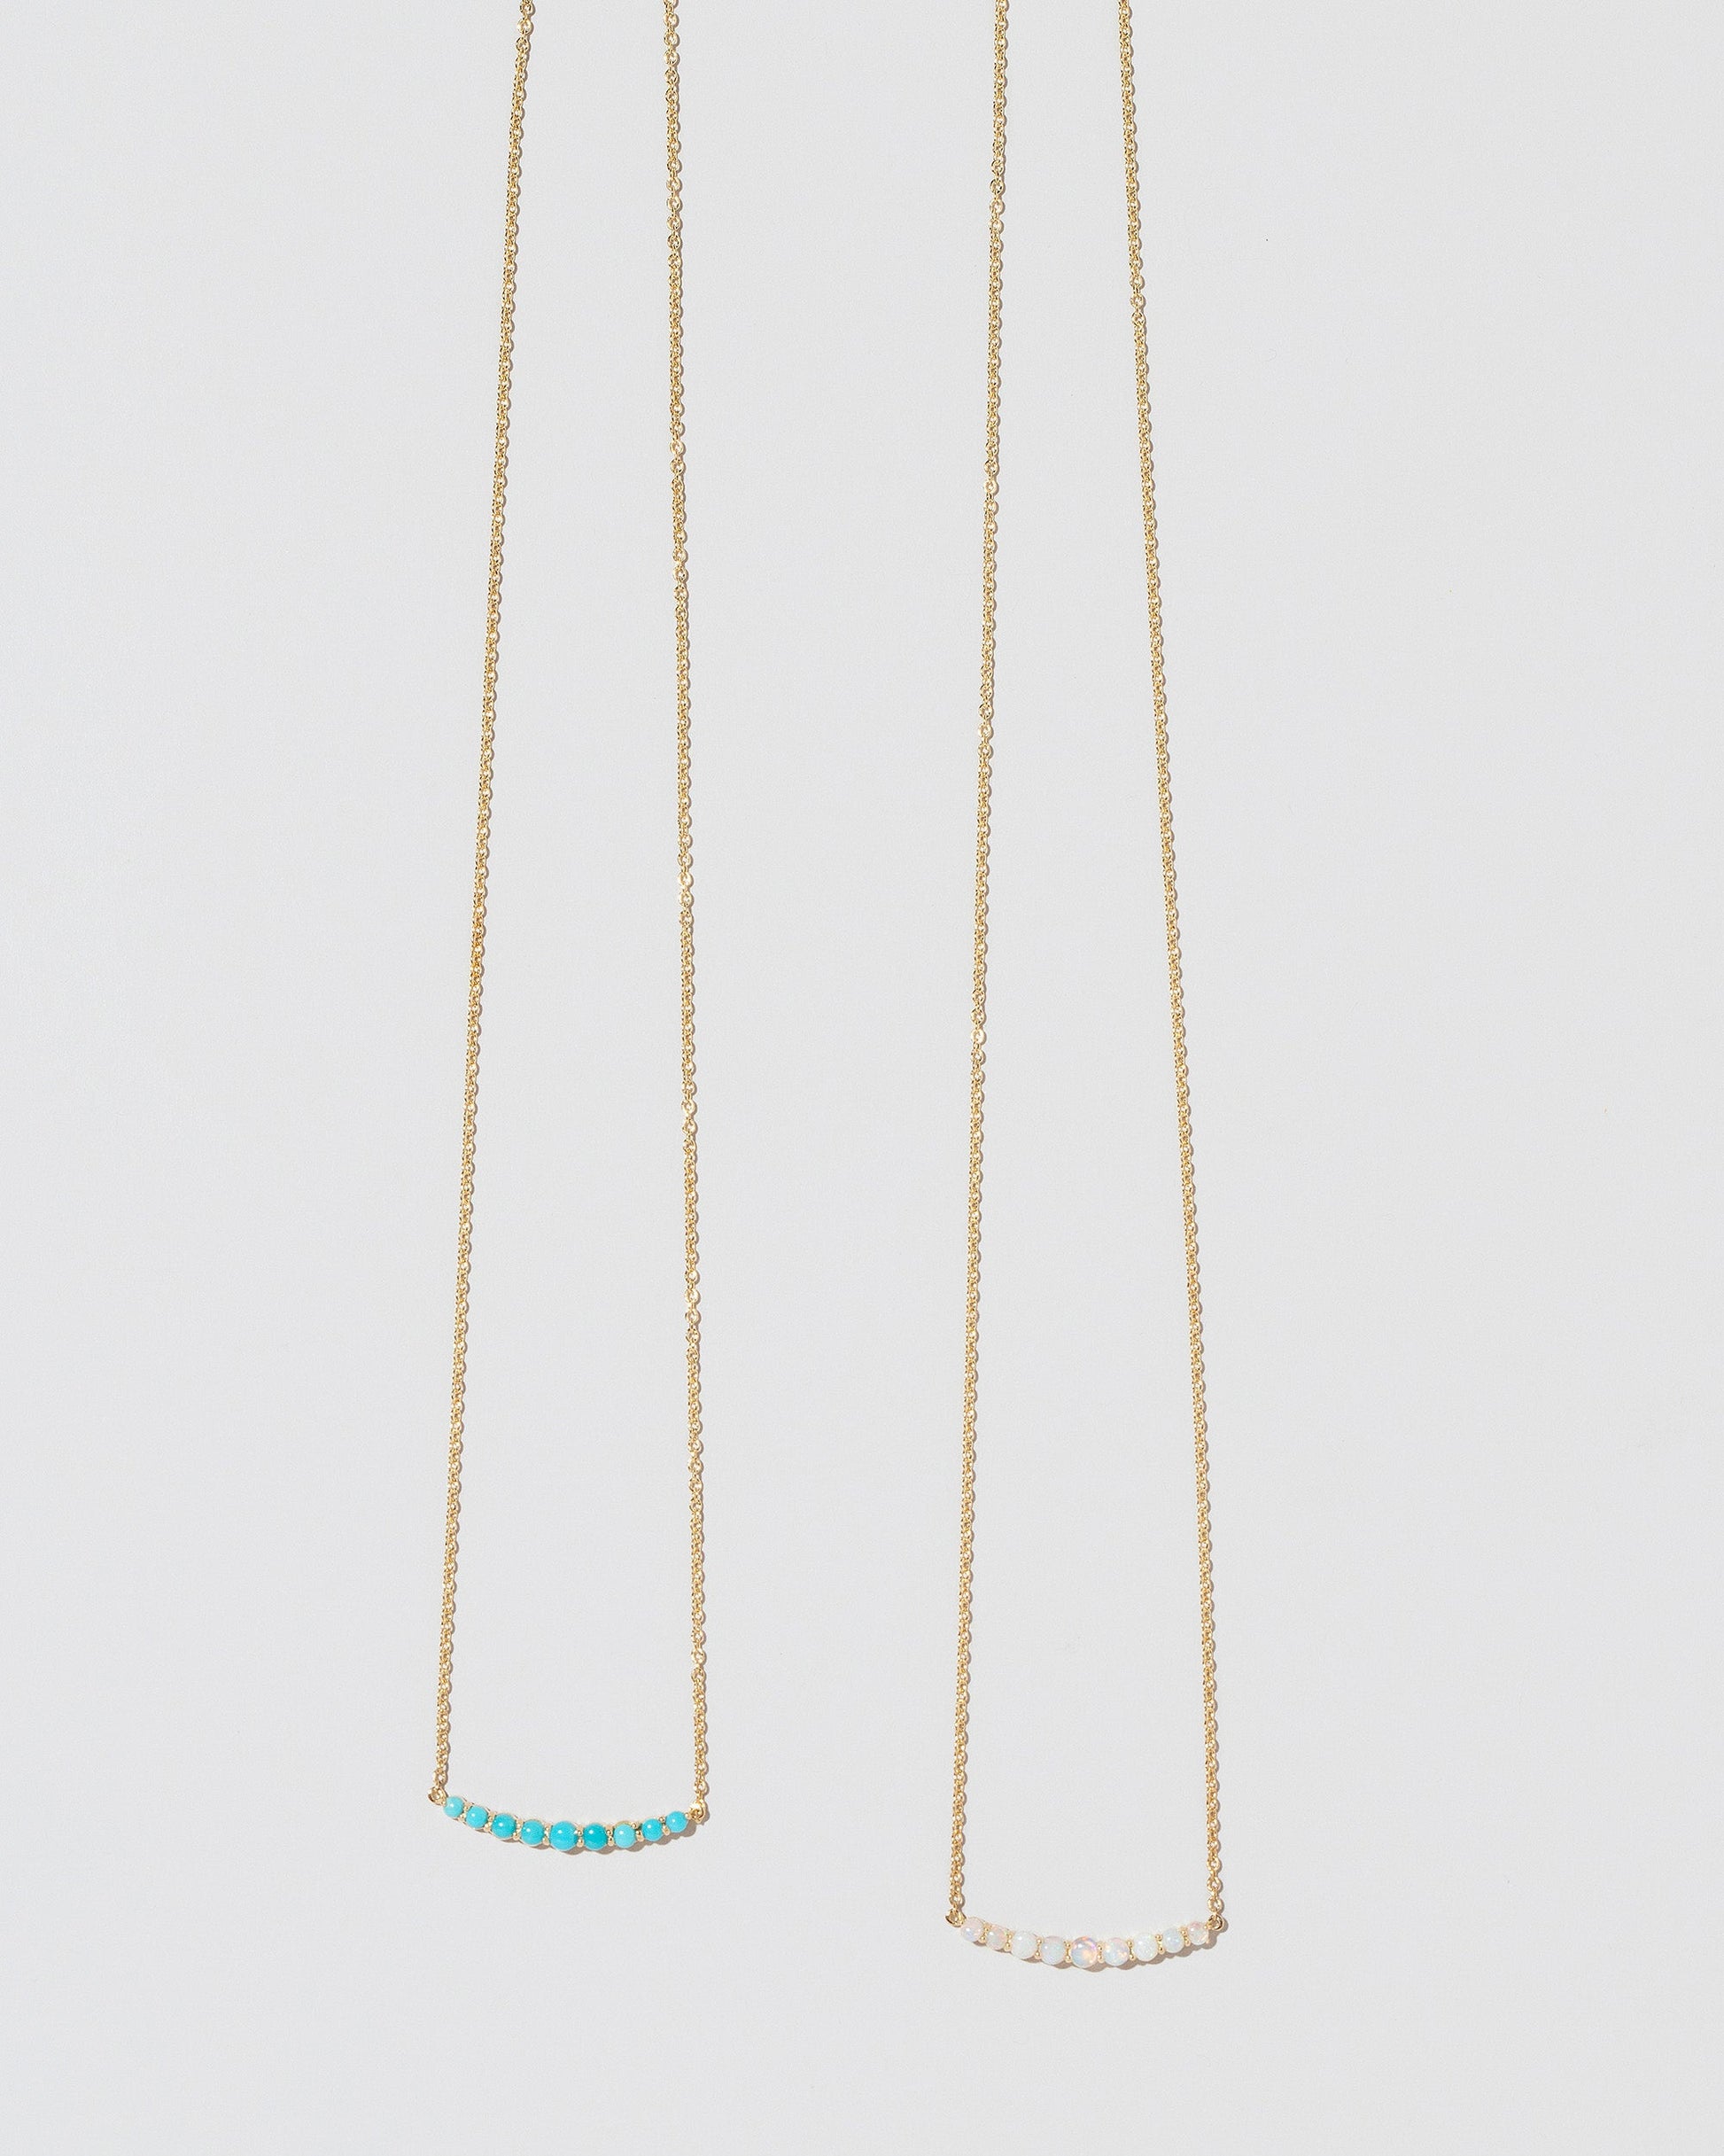 Crescent Necklaces on light colored background.